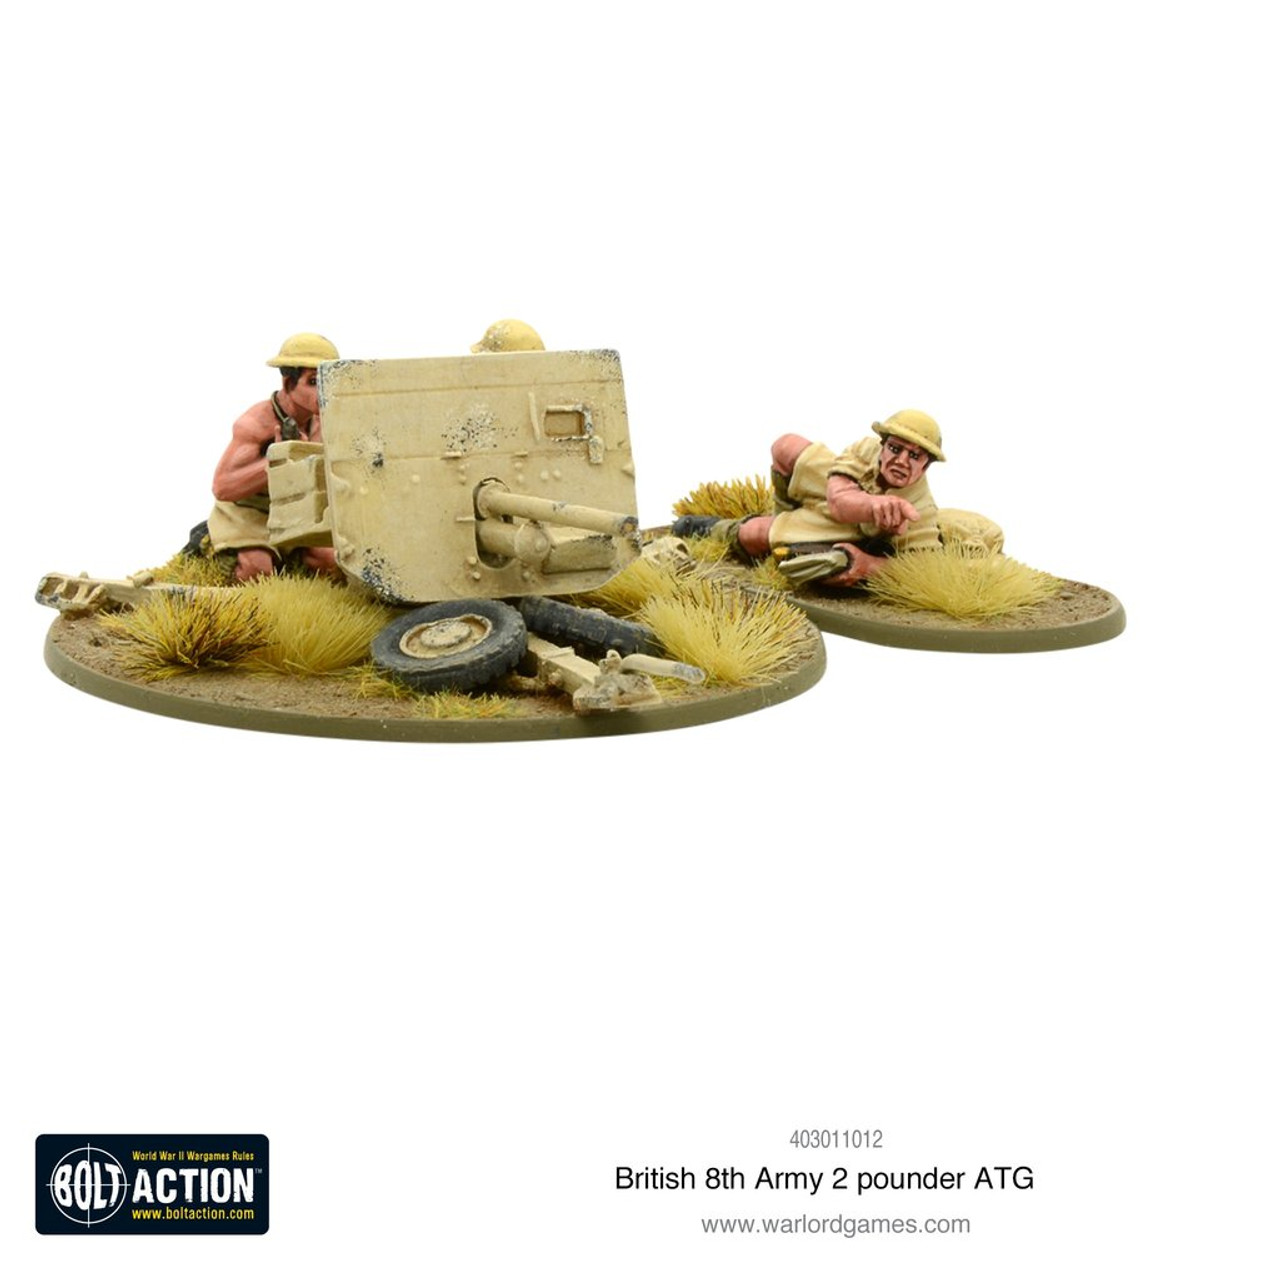 8th Army 2 pounder ATG - 403011012